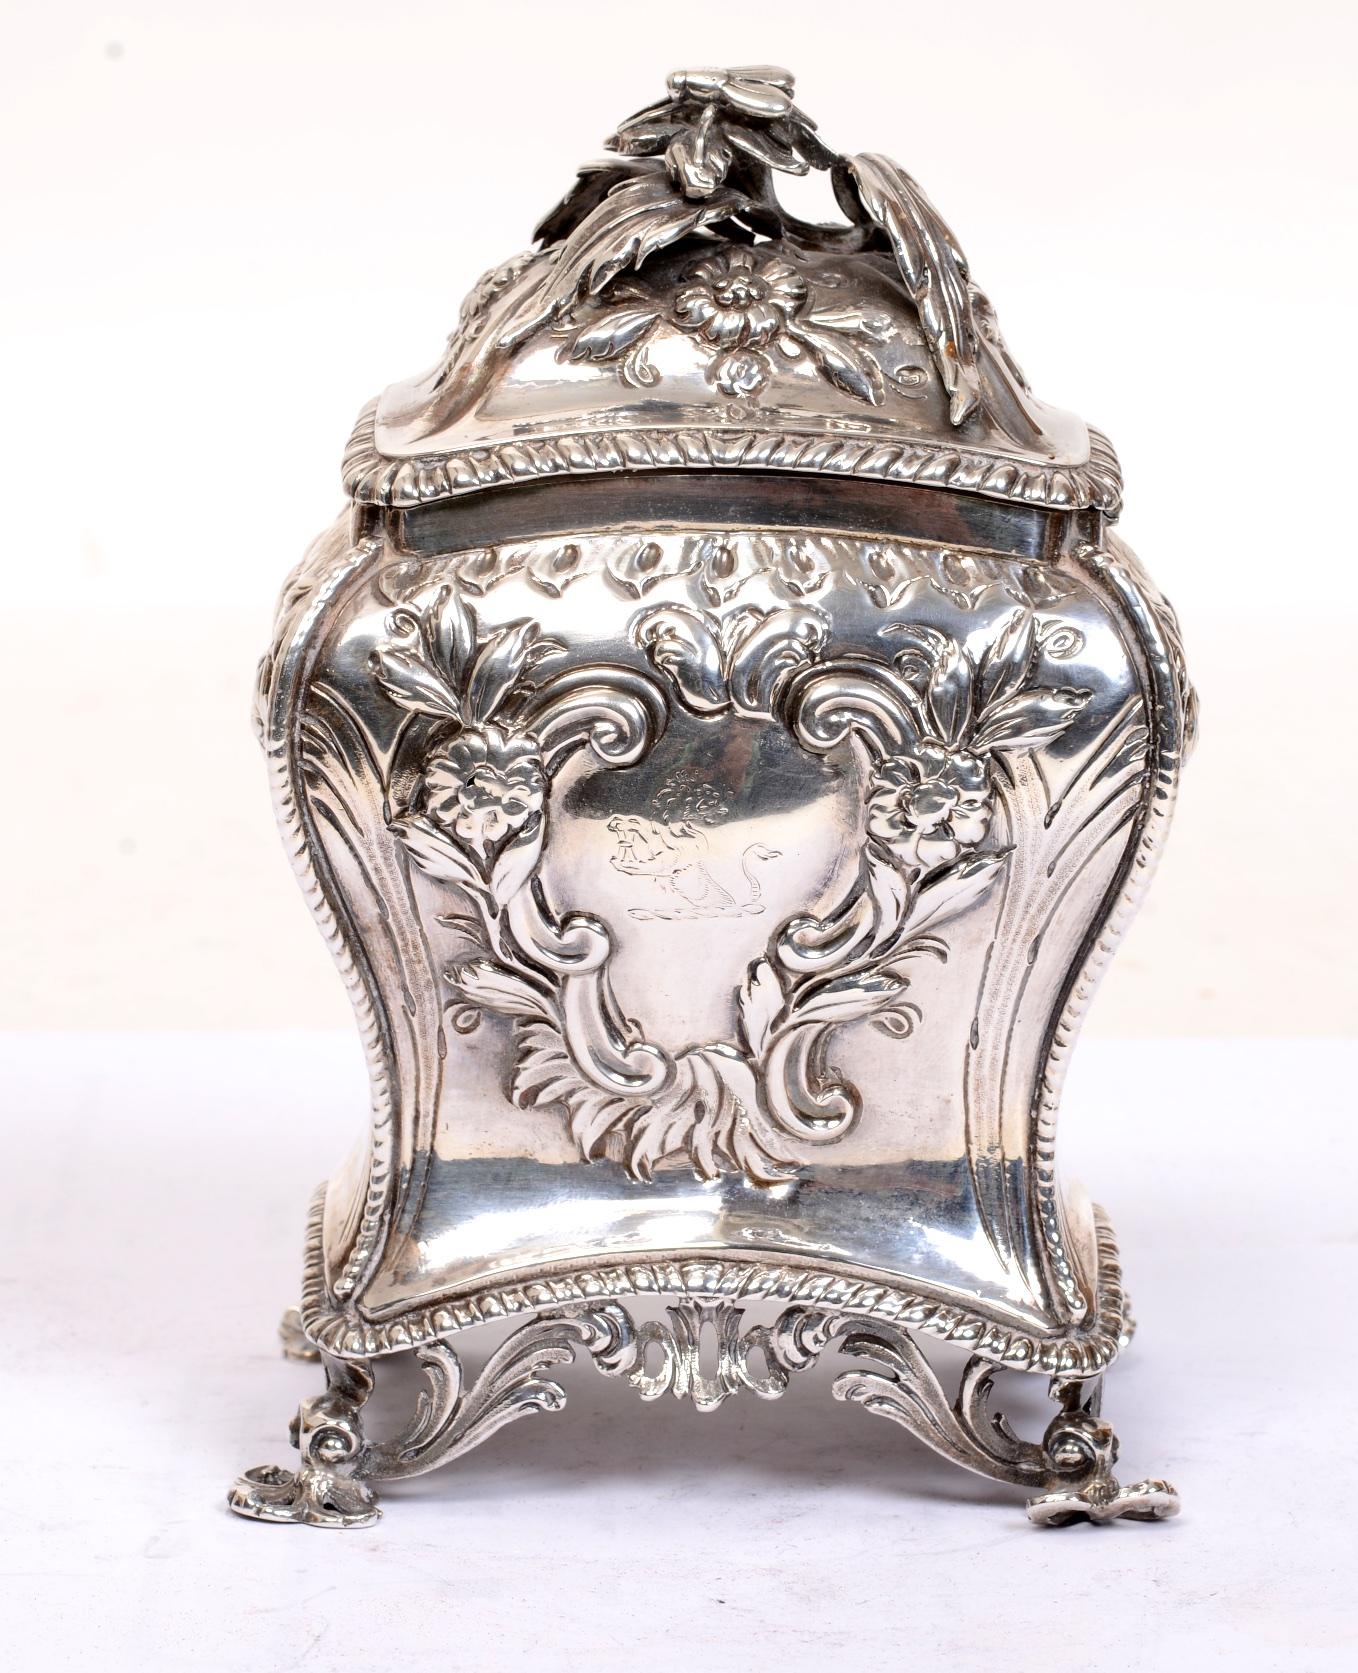 George III London sterling silver tea caddy by Samuel Herbert & Co, circa 1766. Rectangular bombé form with domed cover. The top and sides embossed with repousse flower heads. The hinged top has a floral finial with a stylized bee perched on the